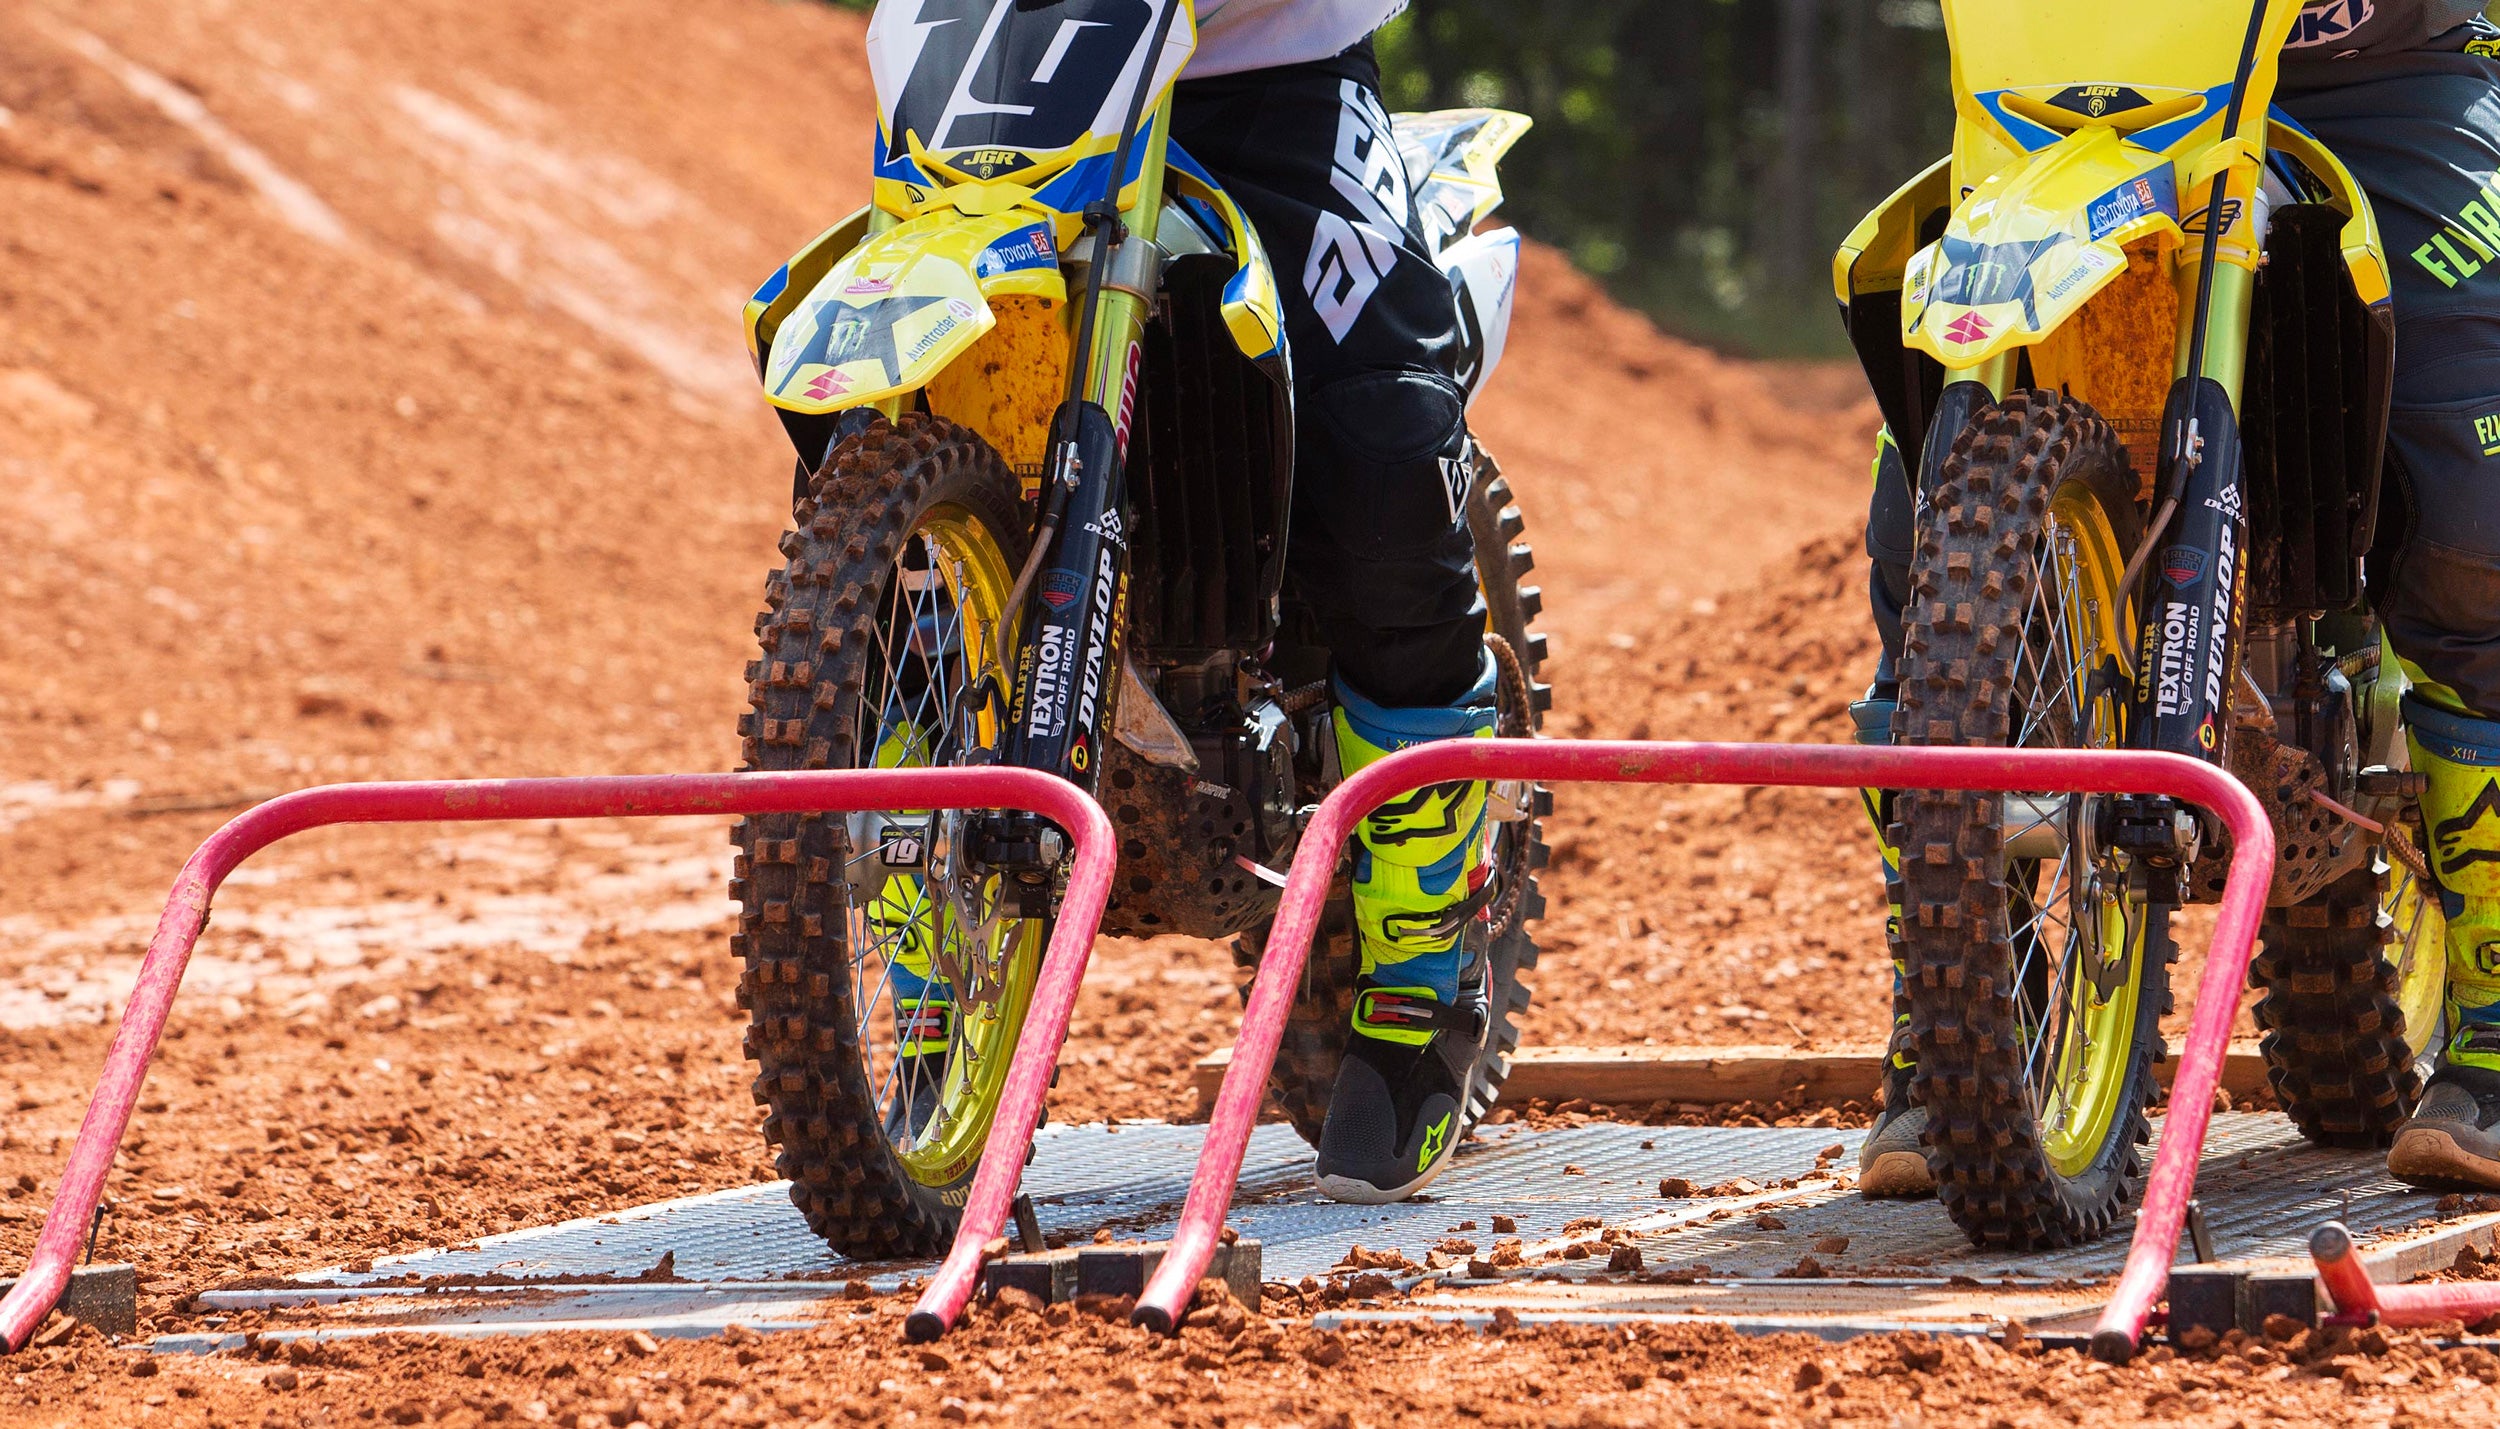 Closeup of two motocross bikes waiting for their Holeshot race gates to drop. Product by Risk Racing. Blurring track in the background.